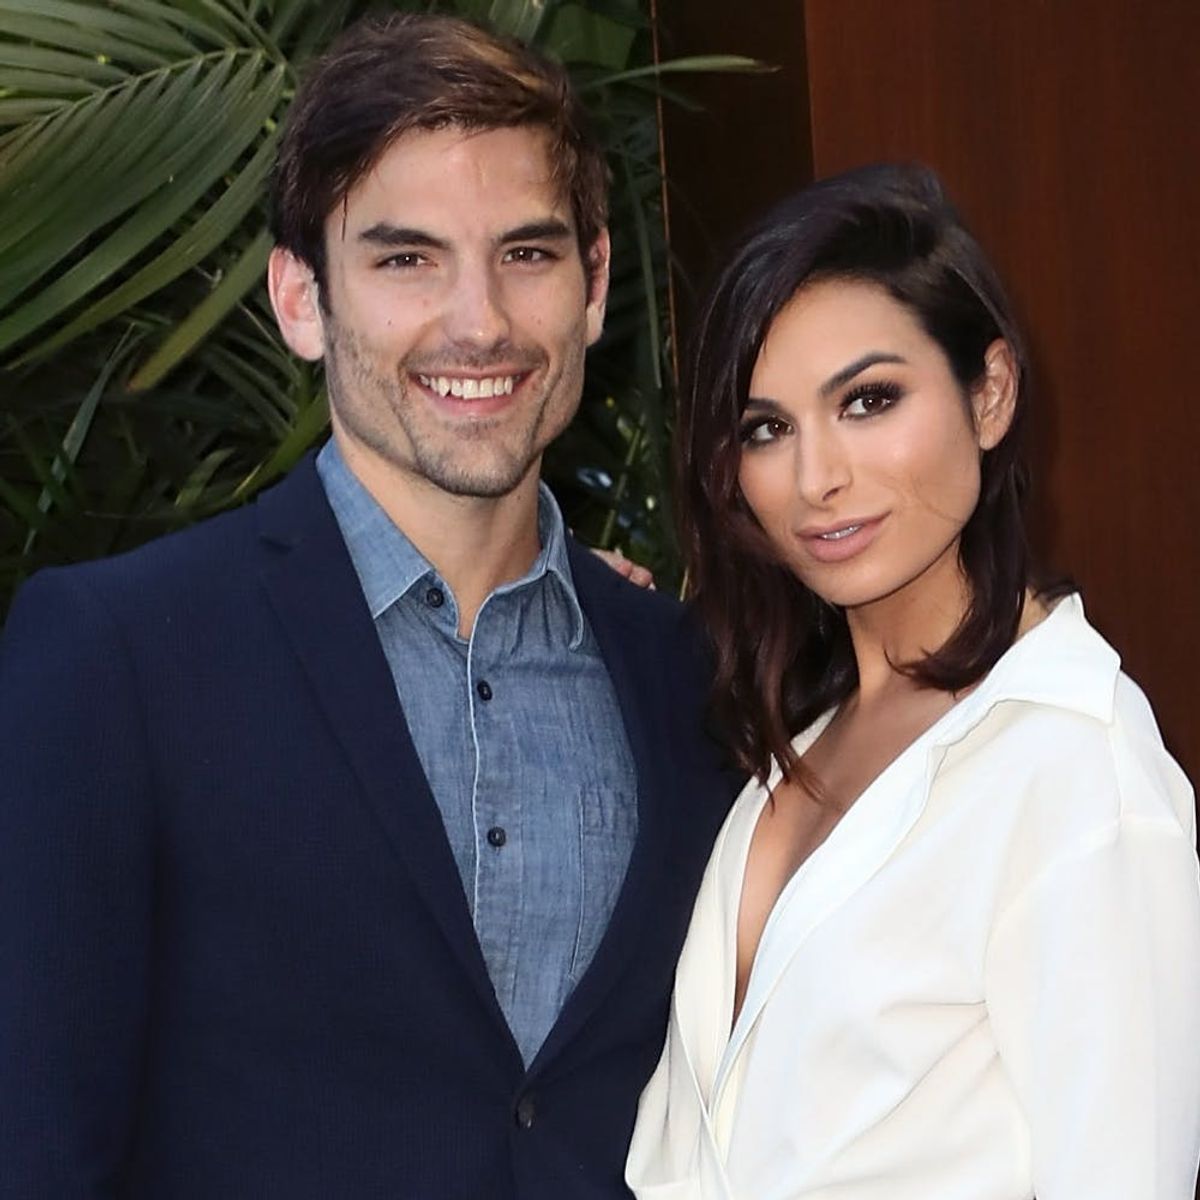 Ashley Iaconetti and Jared Haibon Would Do a TV Wedding Under One Condition